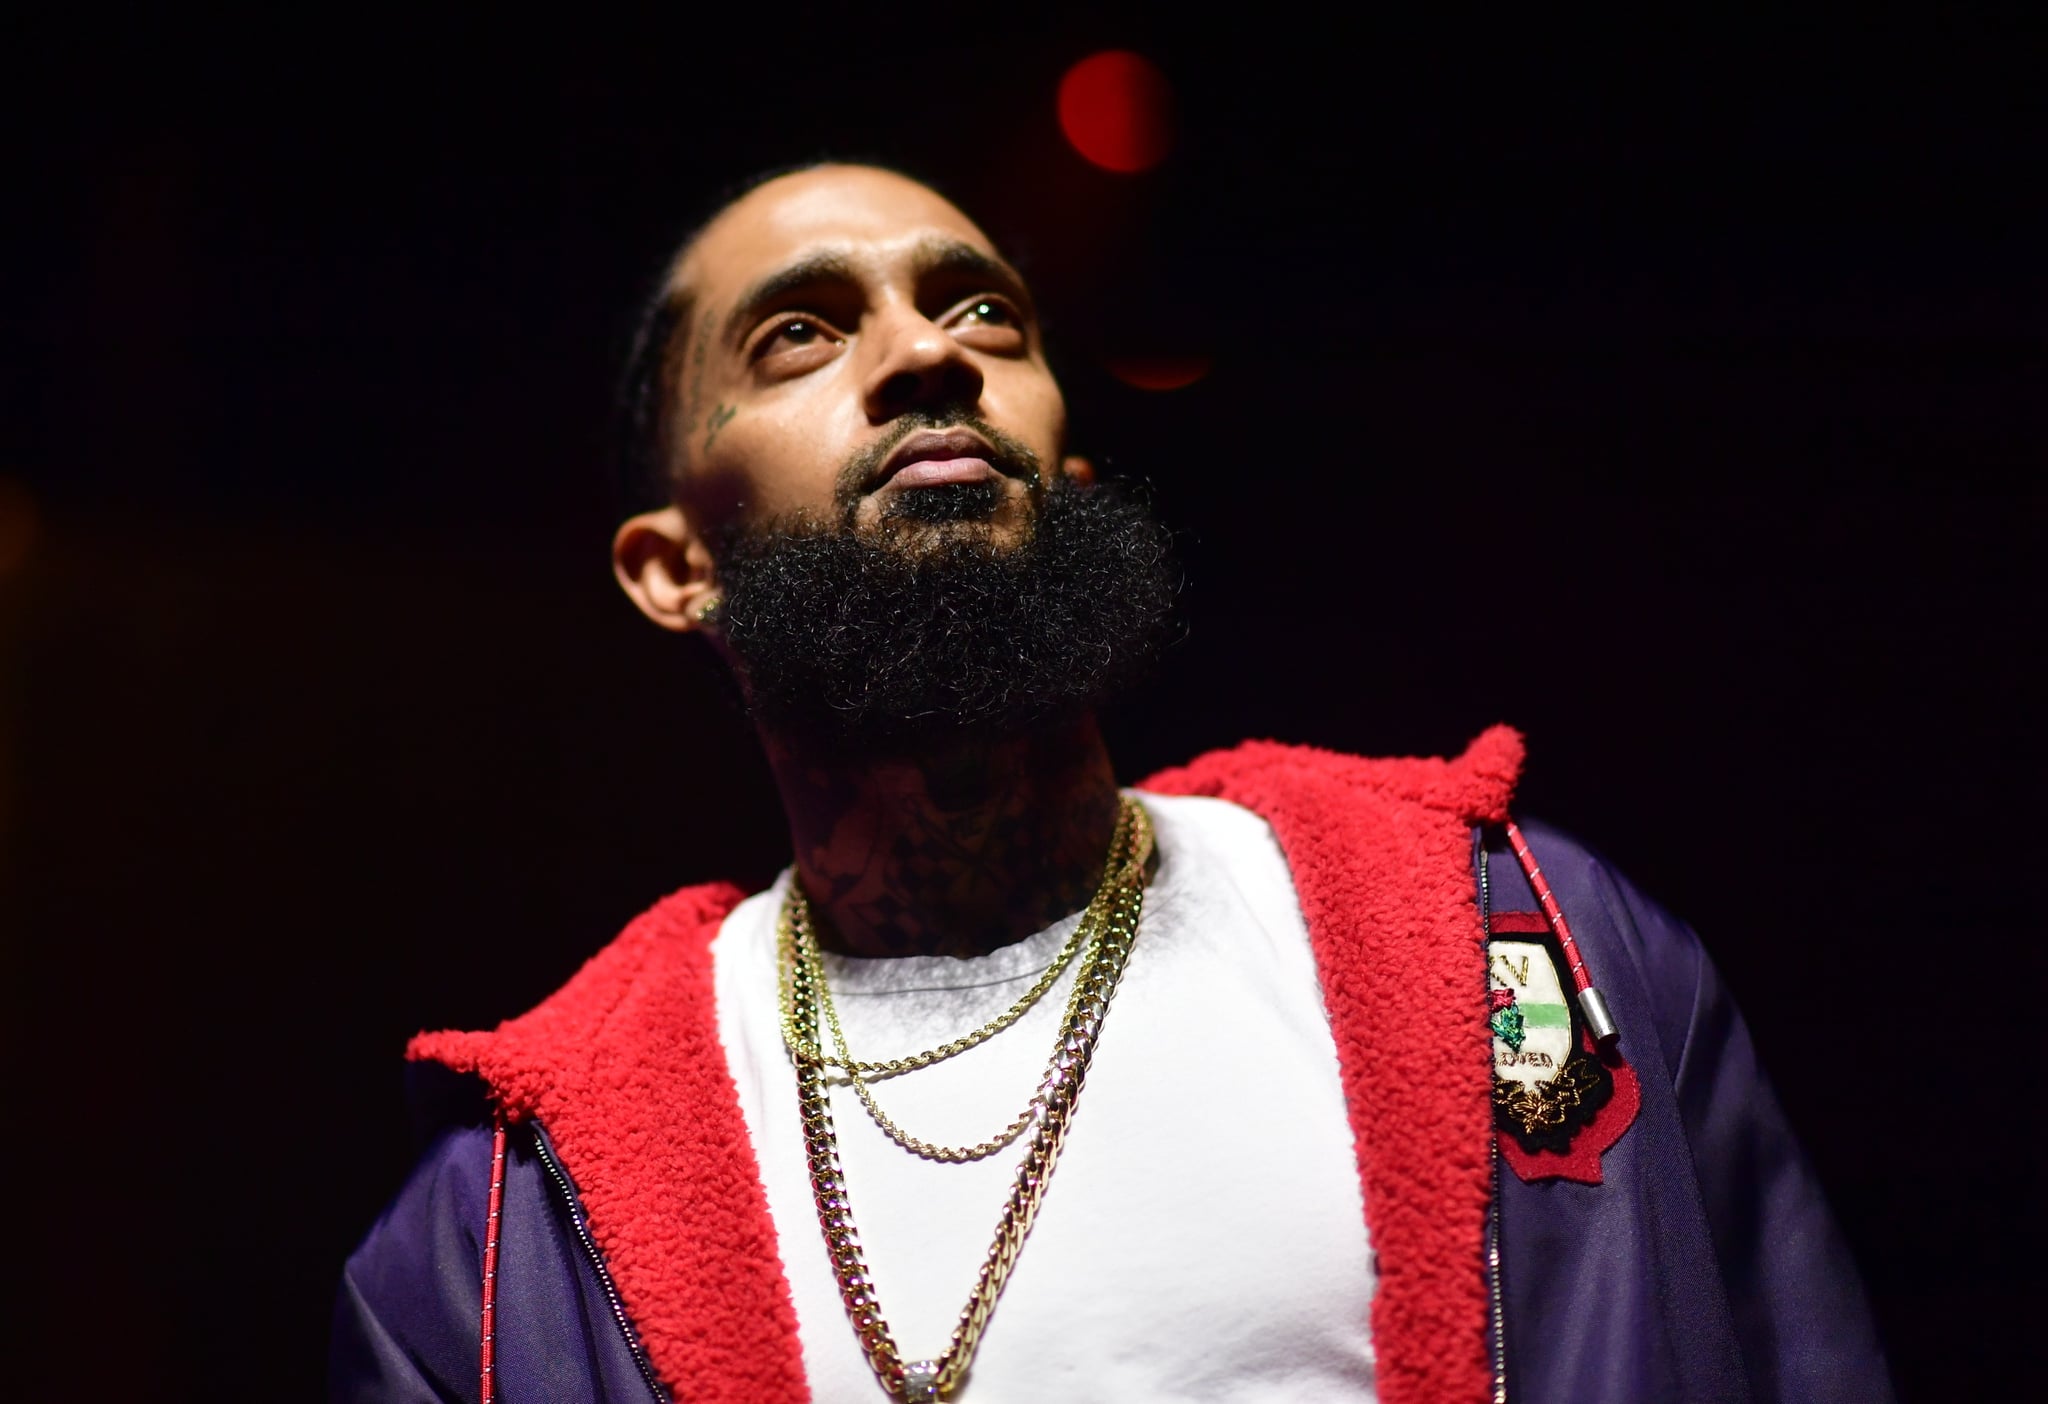 ATLANTA, GA - DECEMBER 10: Rapper Nipsey Hussle attends A Craft Syndicate Music Collaboration Unveiling Event at Opera Atlanta on December 10, 2018 in Atlanta, Georgia.(photo by Prince Williams/Wireimage)